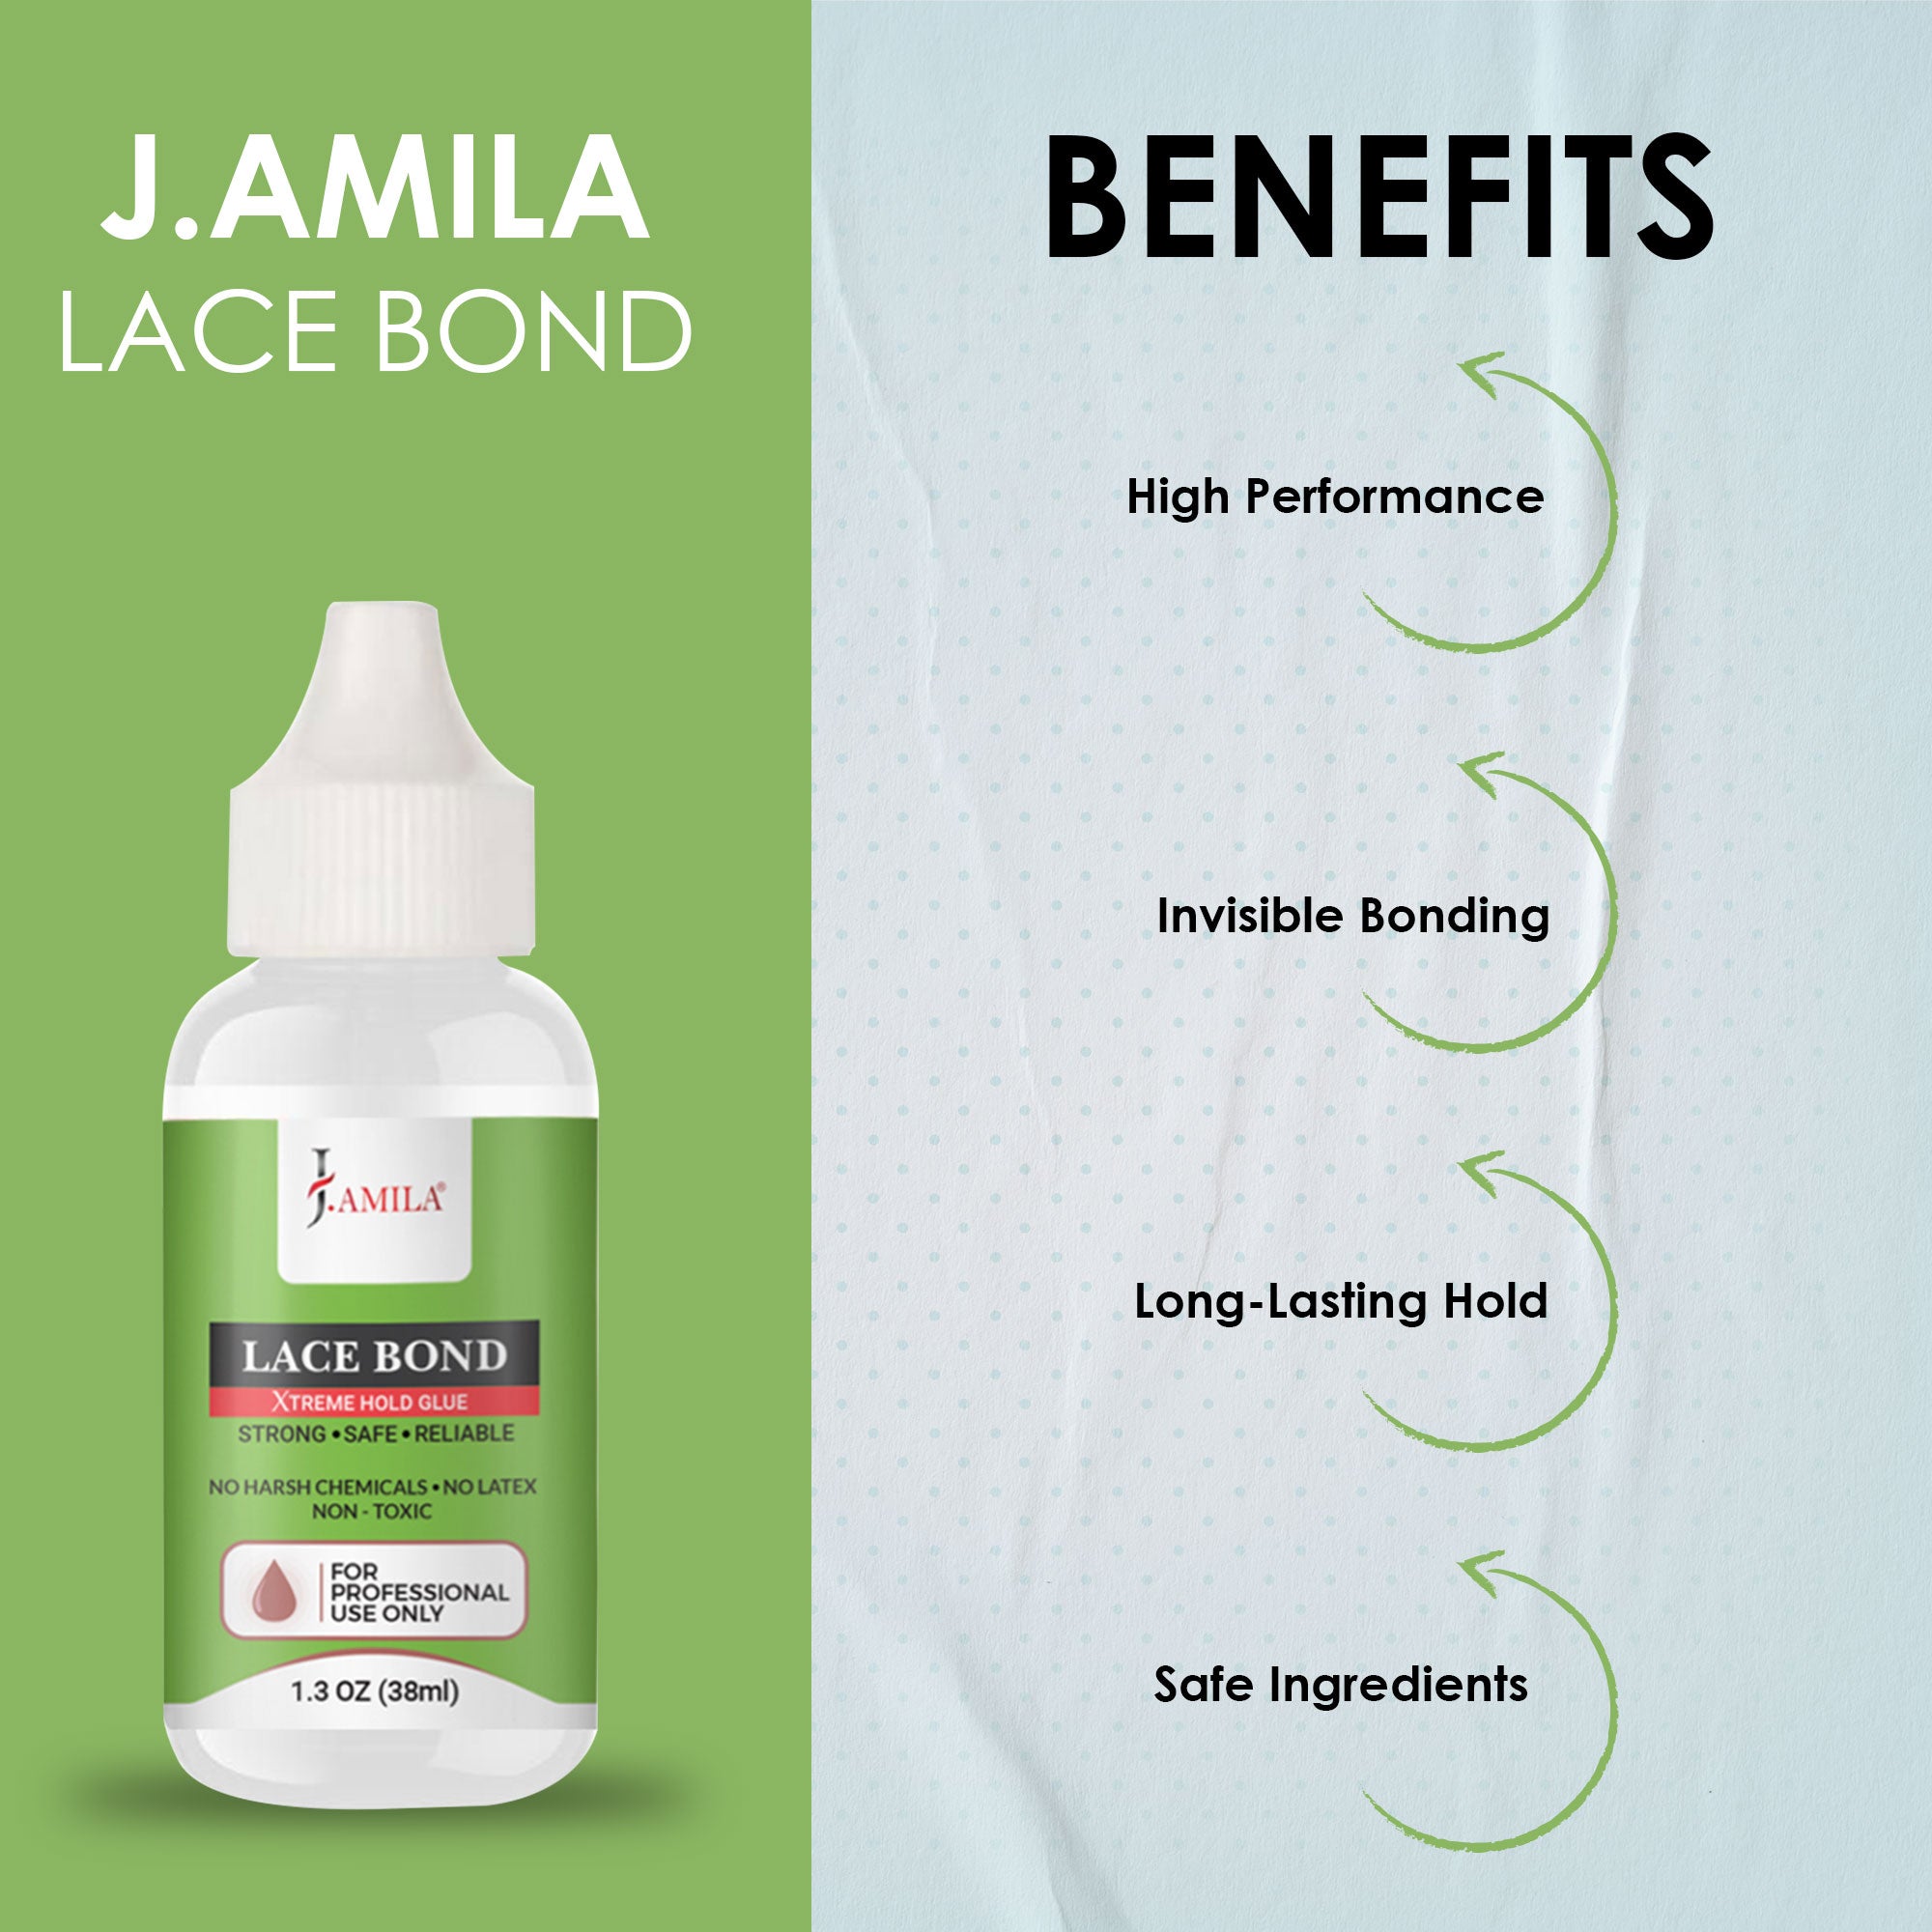 J. AMILA Lace Bond Xtreme Hold Glue - Strong, Safe, Reliable, No Harsh Chemicals, Non-Toxic, Invisible Wig Bond, Long-Lasting Hold, Professional Use, 1.3 oz 38ml